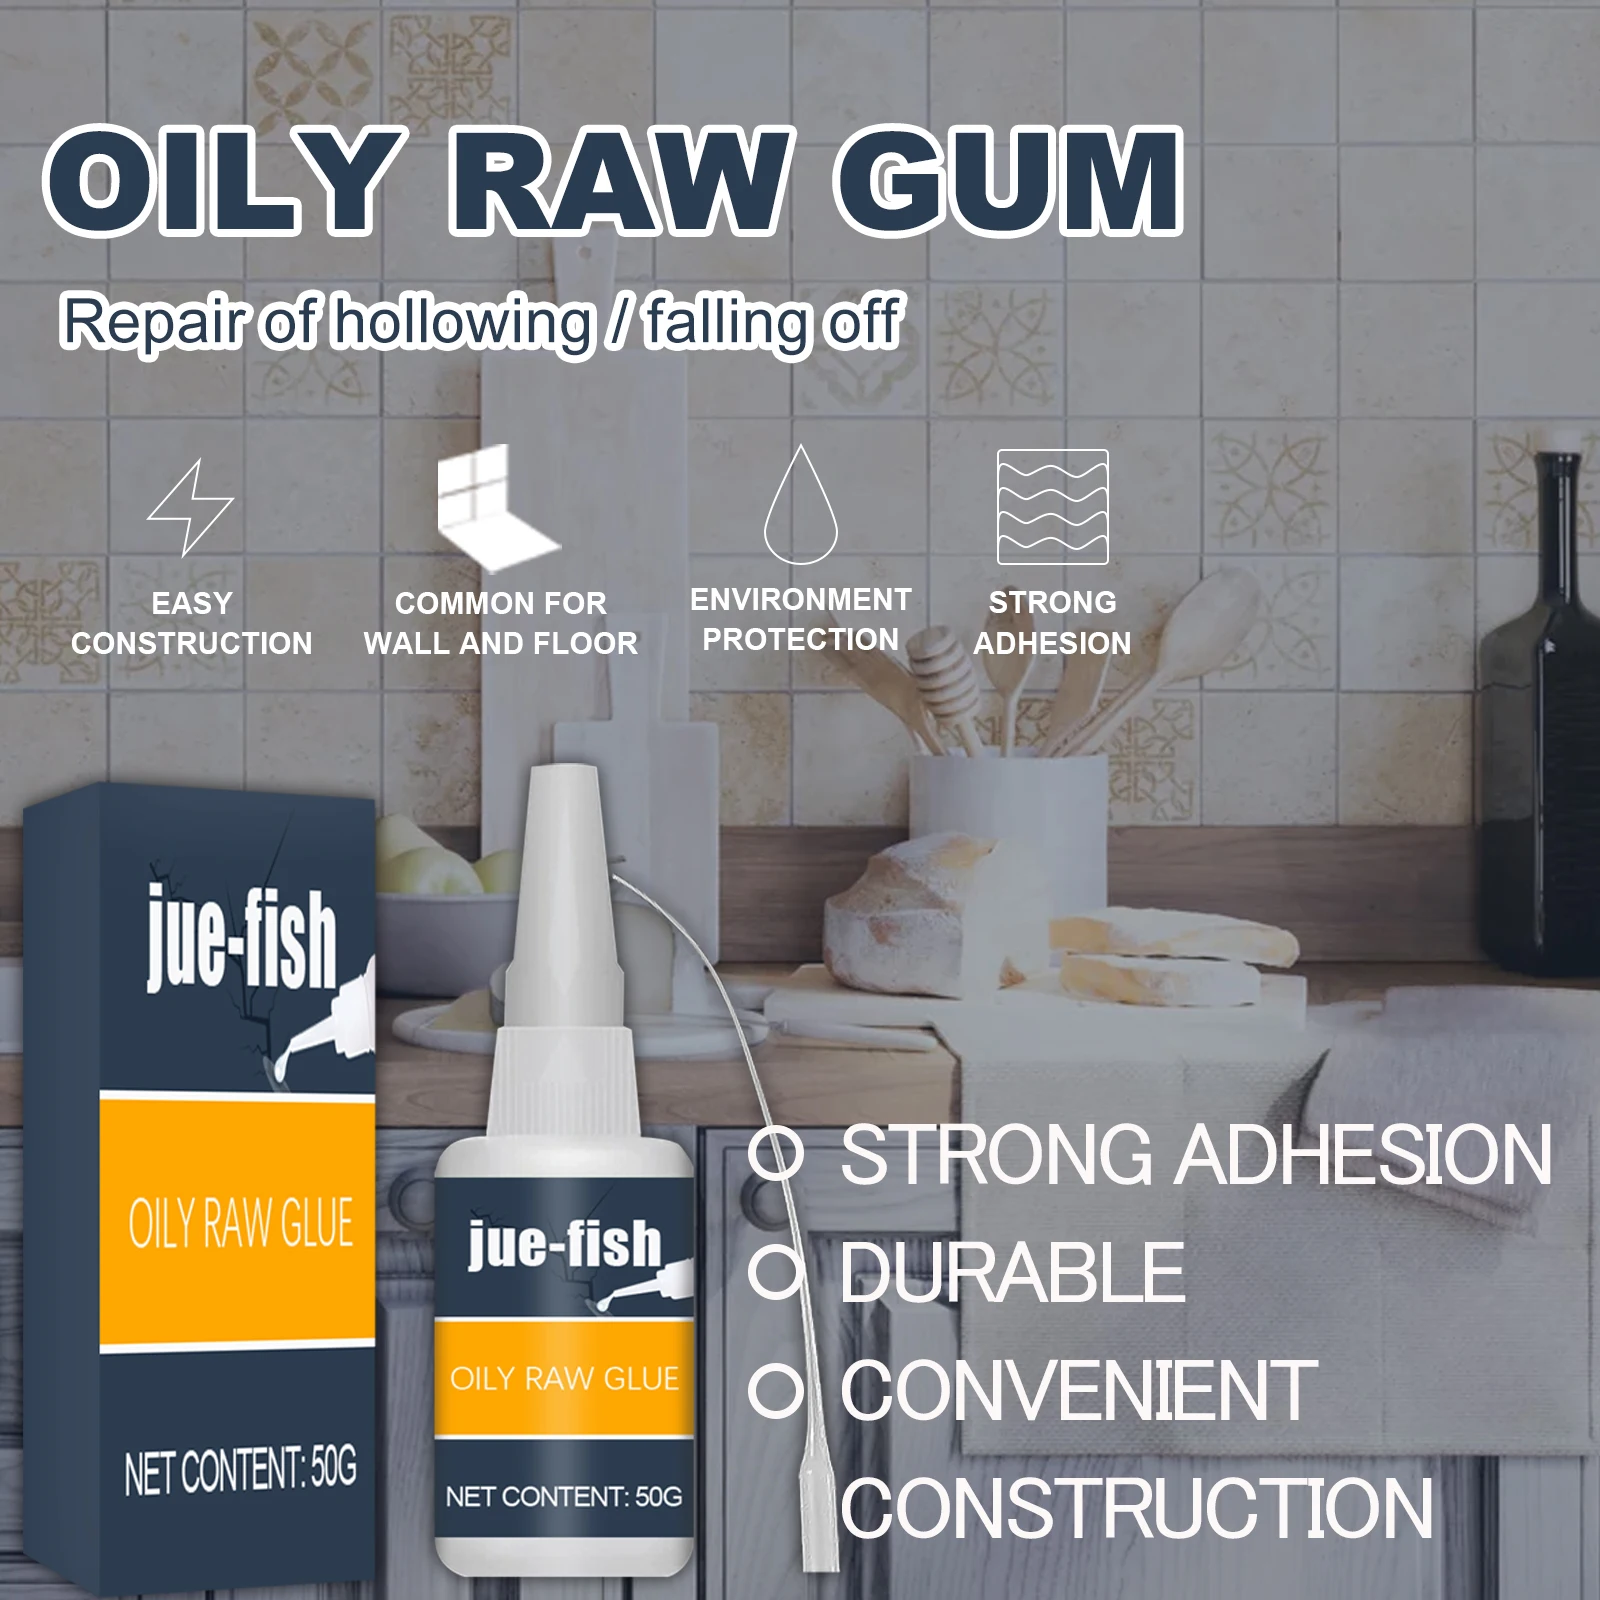 

Multi-Purpose Glue Oily Raw Adhesive Gum Strong Liquid Glue with Small Tip for DIY Craft Wood Glass Metal 50g Adhesive Glue